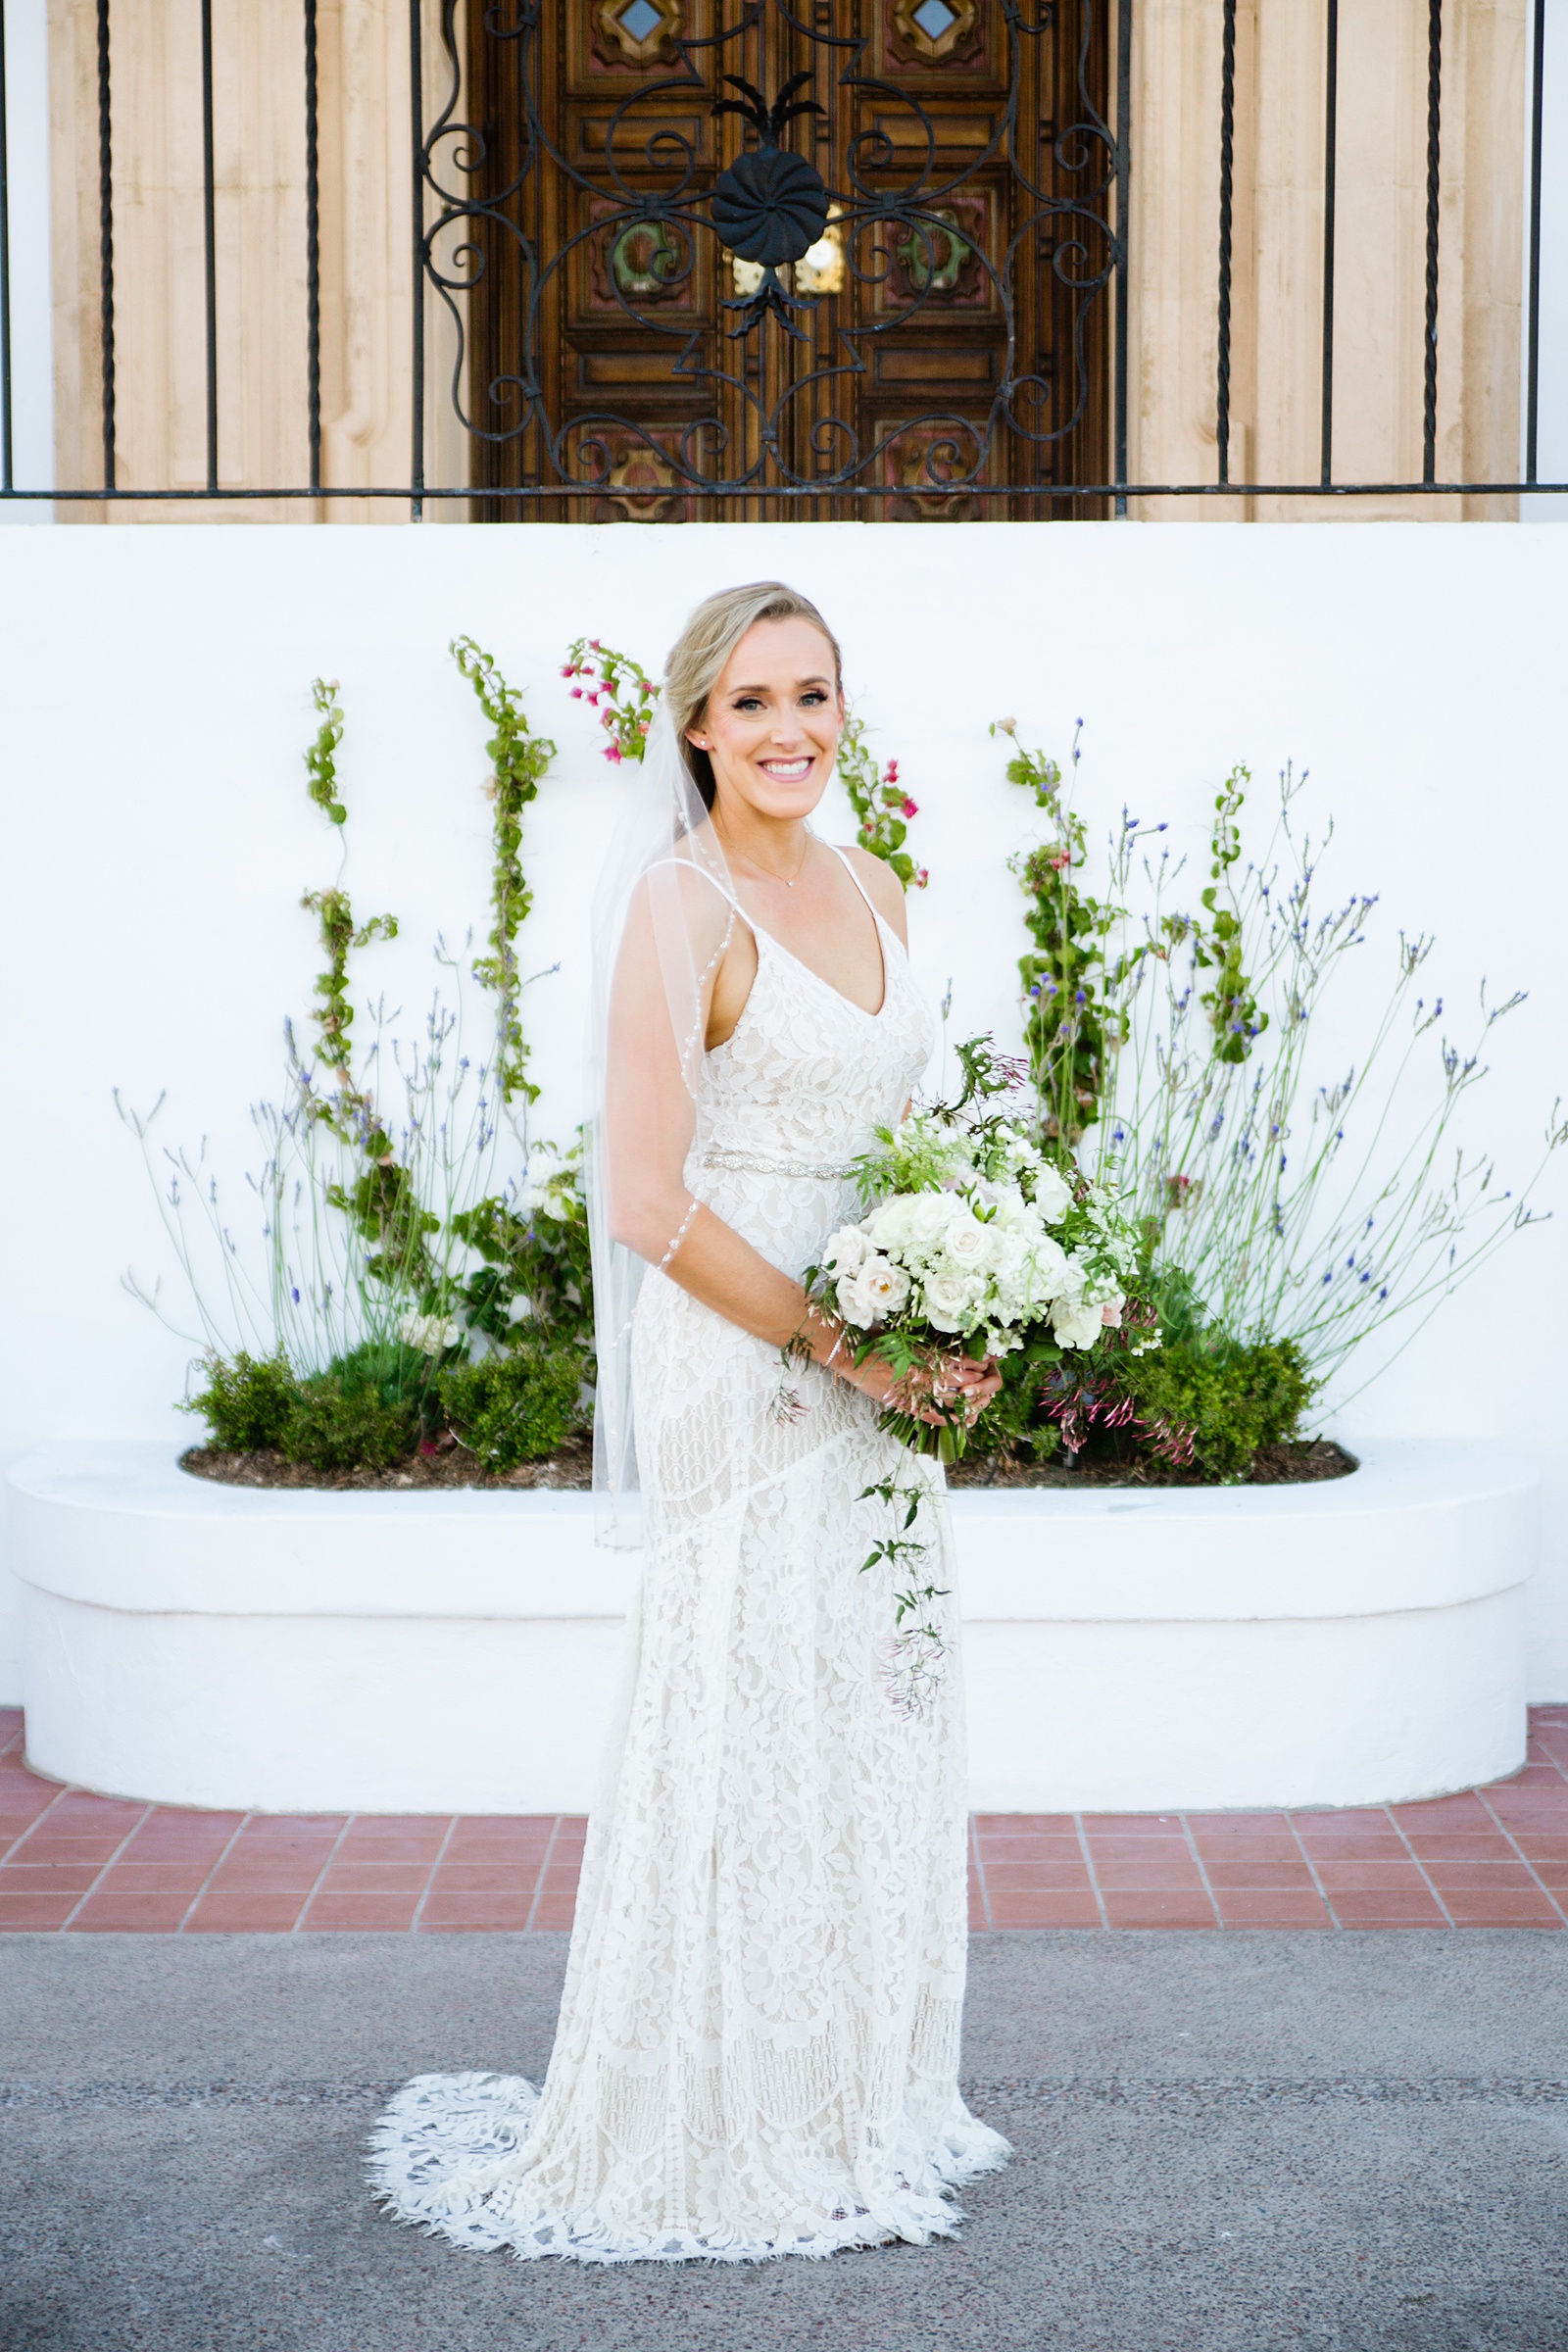 Bride's romantic lace wedding dress for her Wrigley Mansion wedding by PMA Photography.